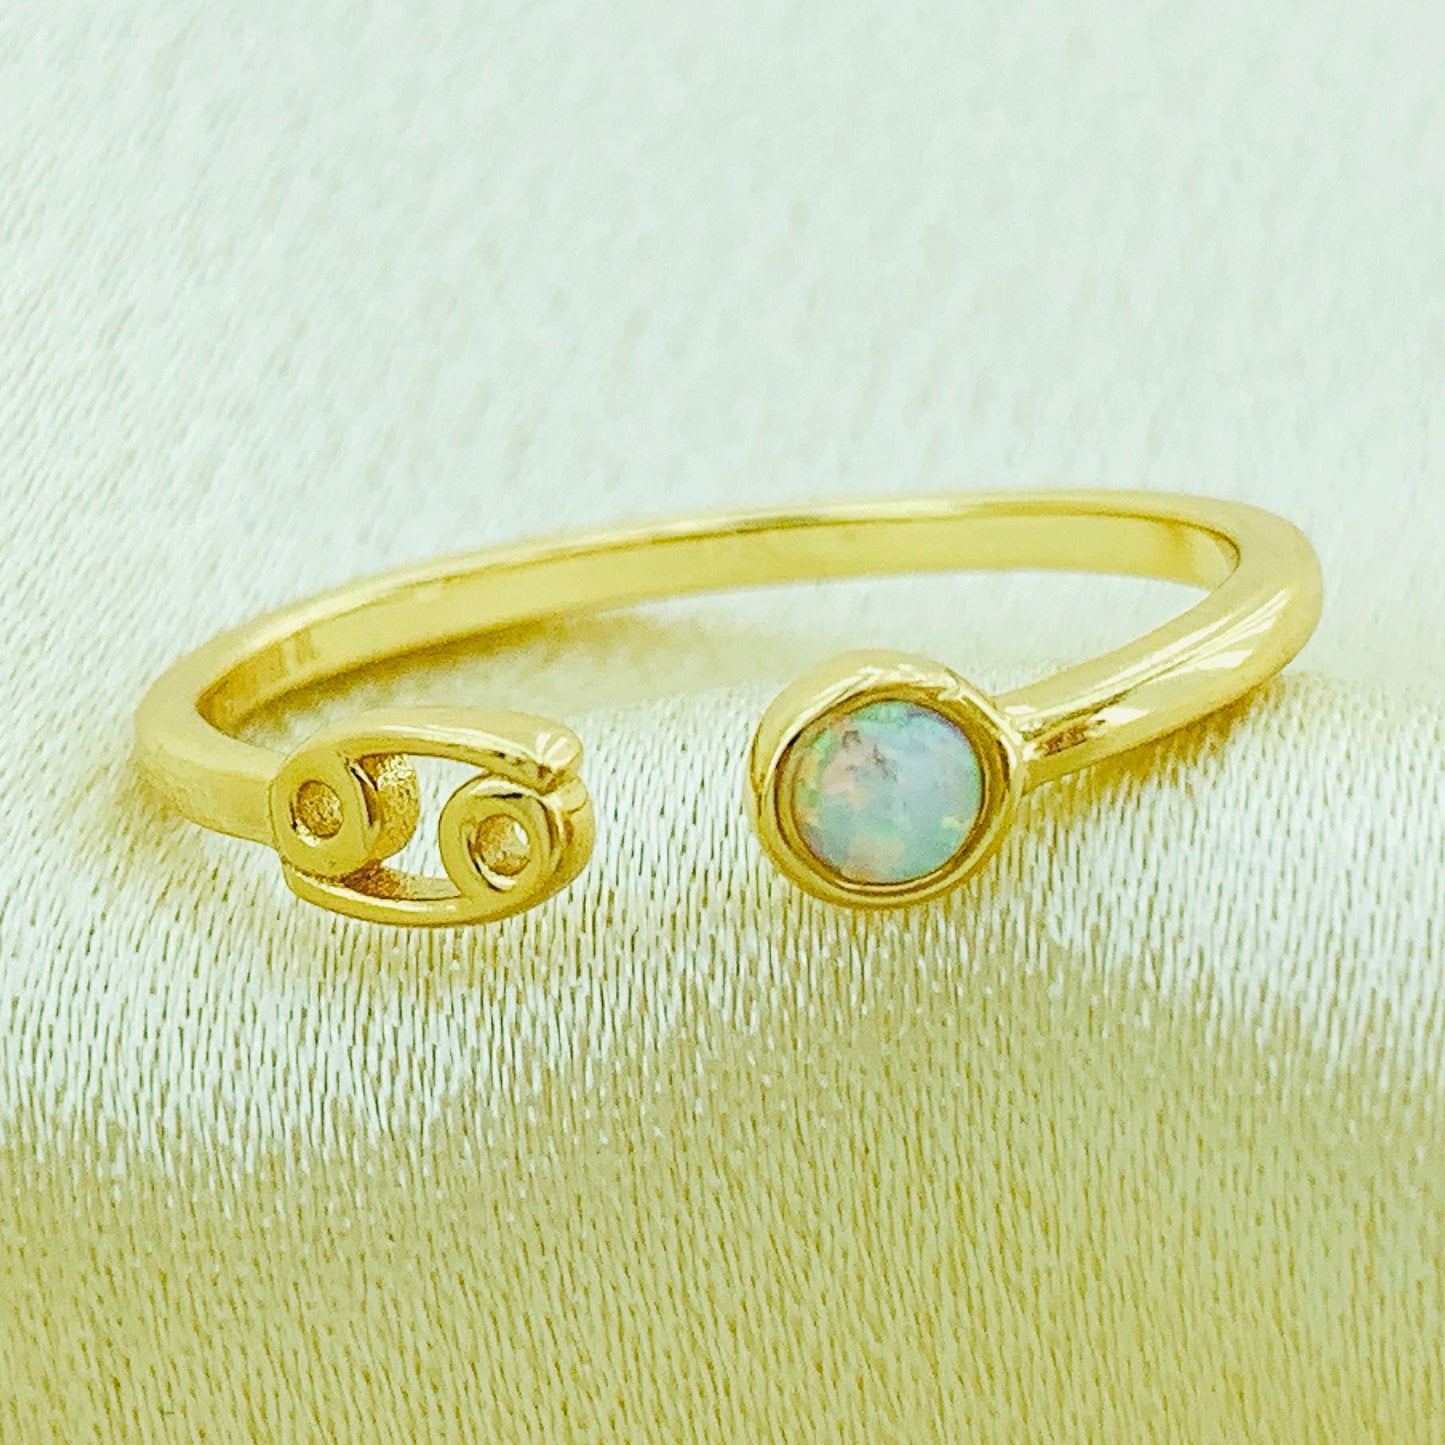 925 Silver Cancer Opal Constellation Ring